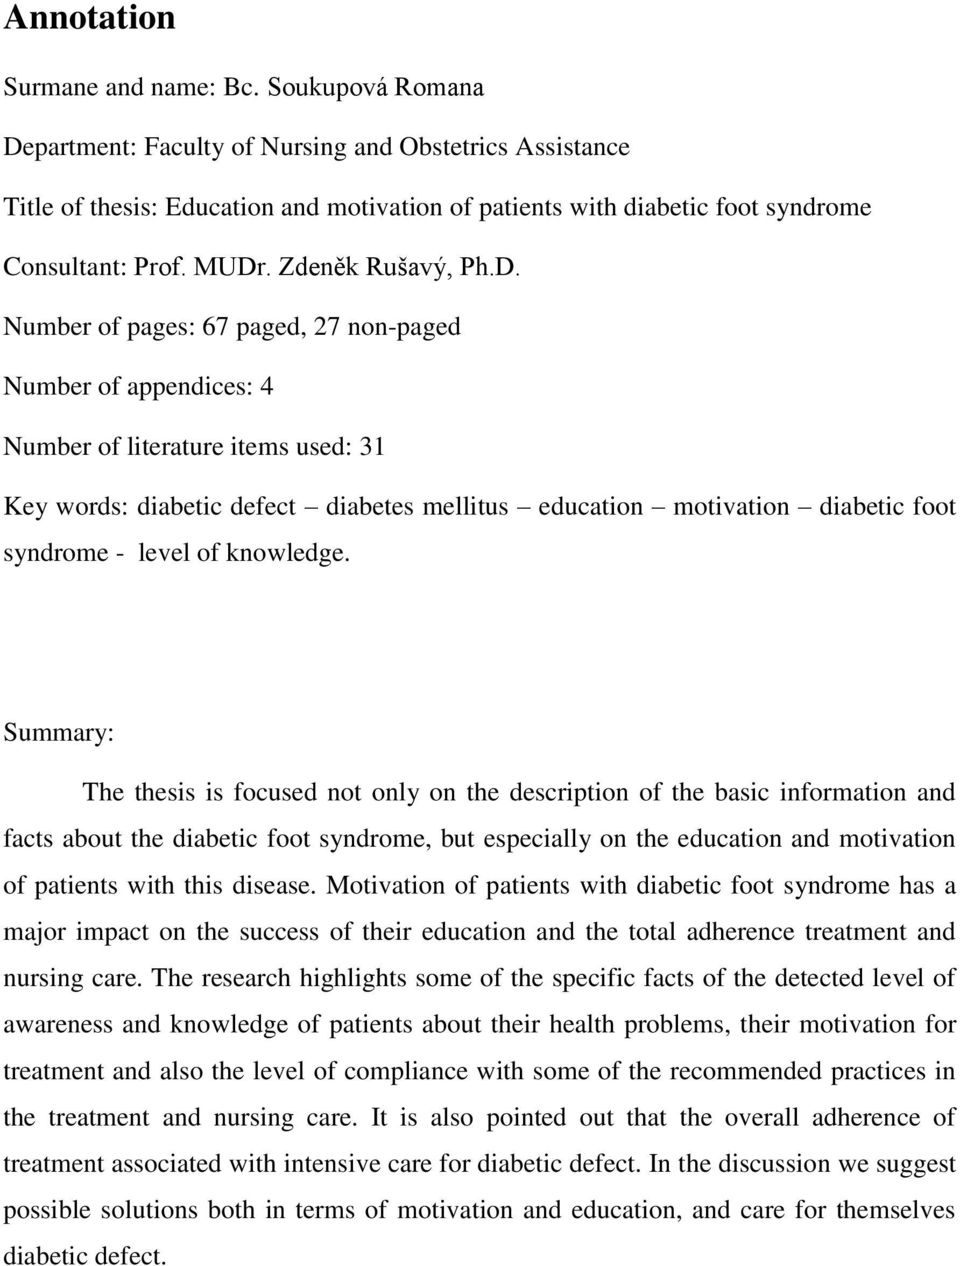 partment: Faculty of Nursing and Obstetrics Assistance Title of thesis: Education and motivation of patients with diabetic foot syndrome Consultant: Prof. MUDr